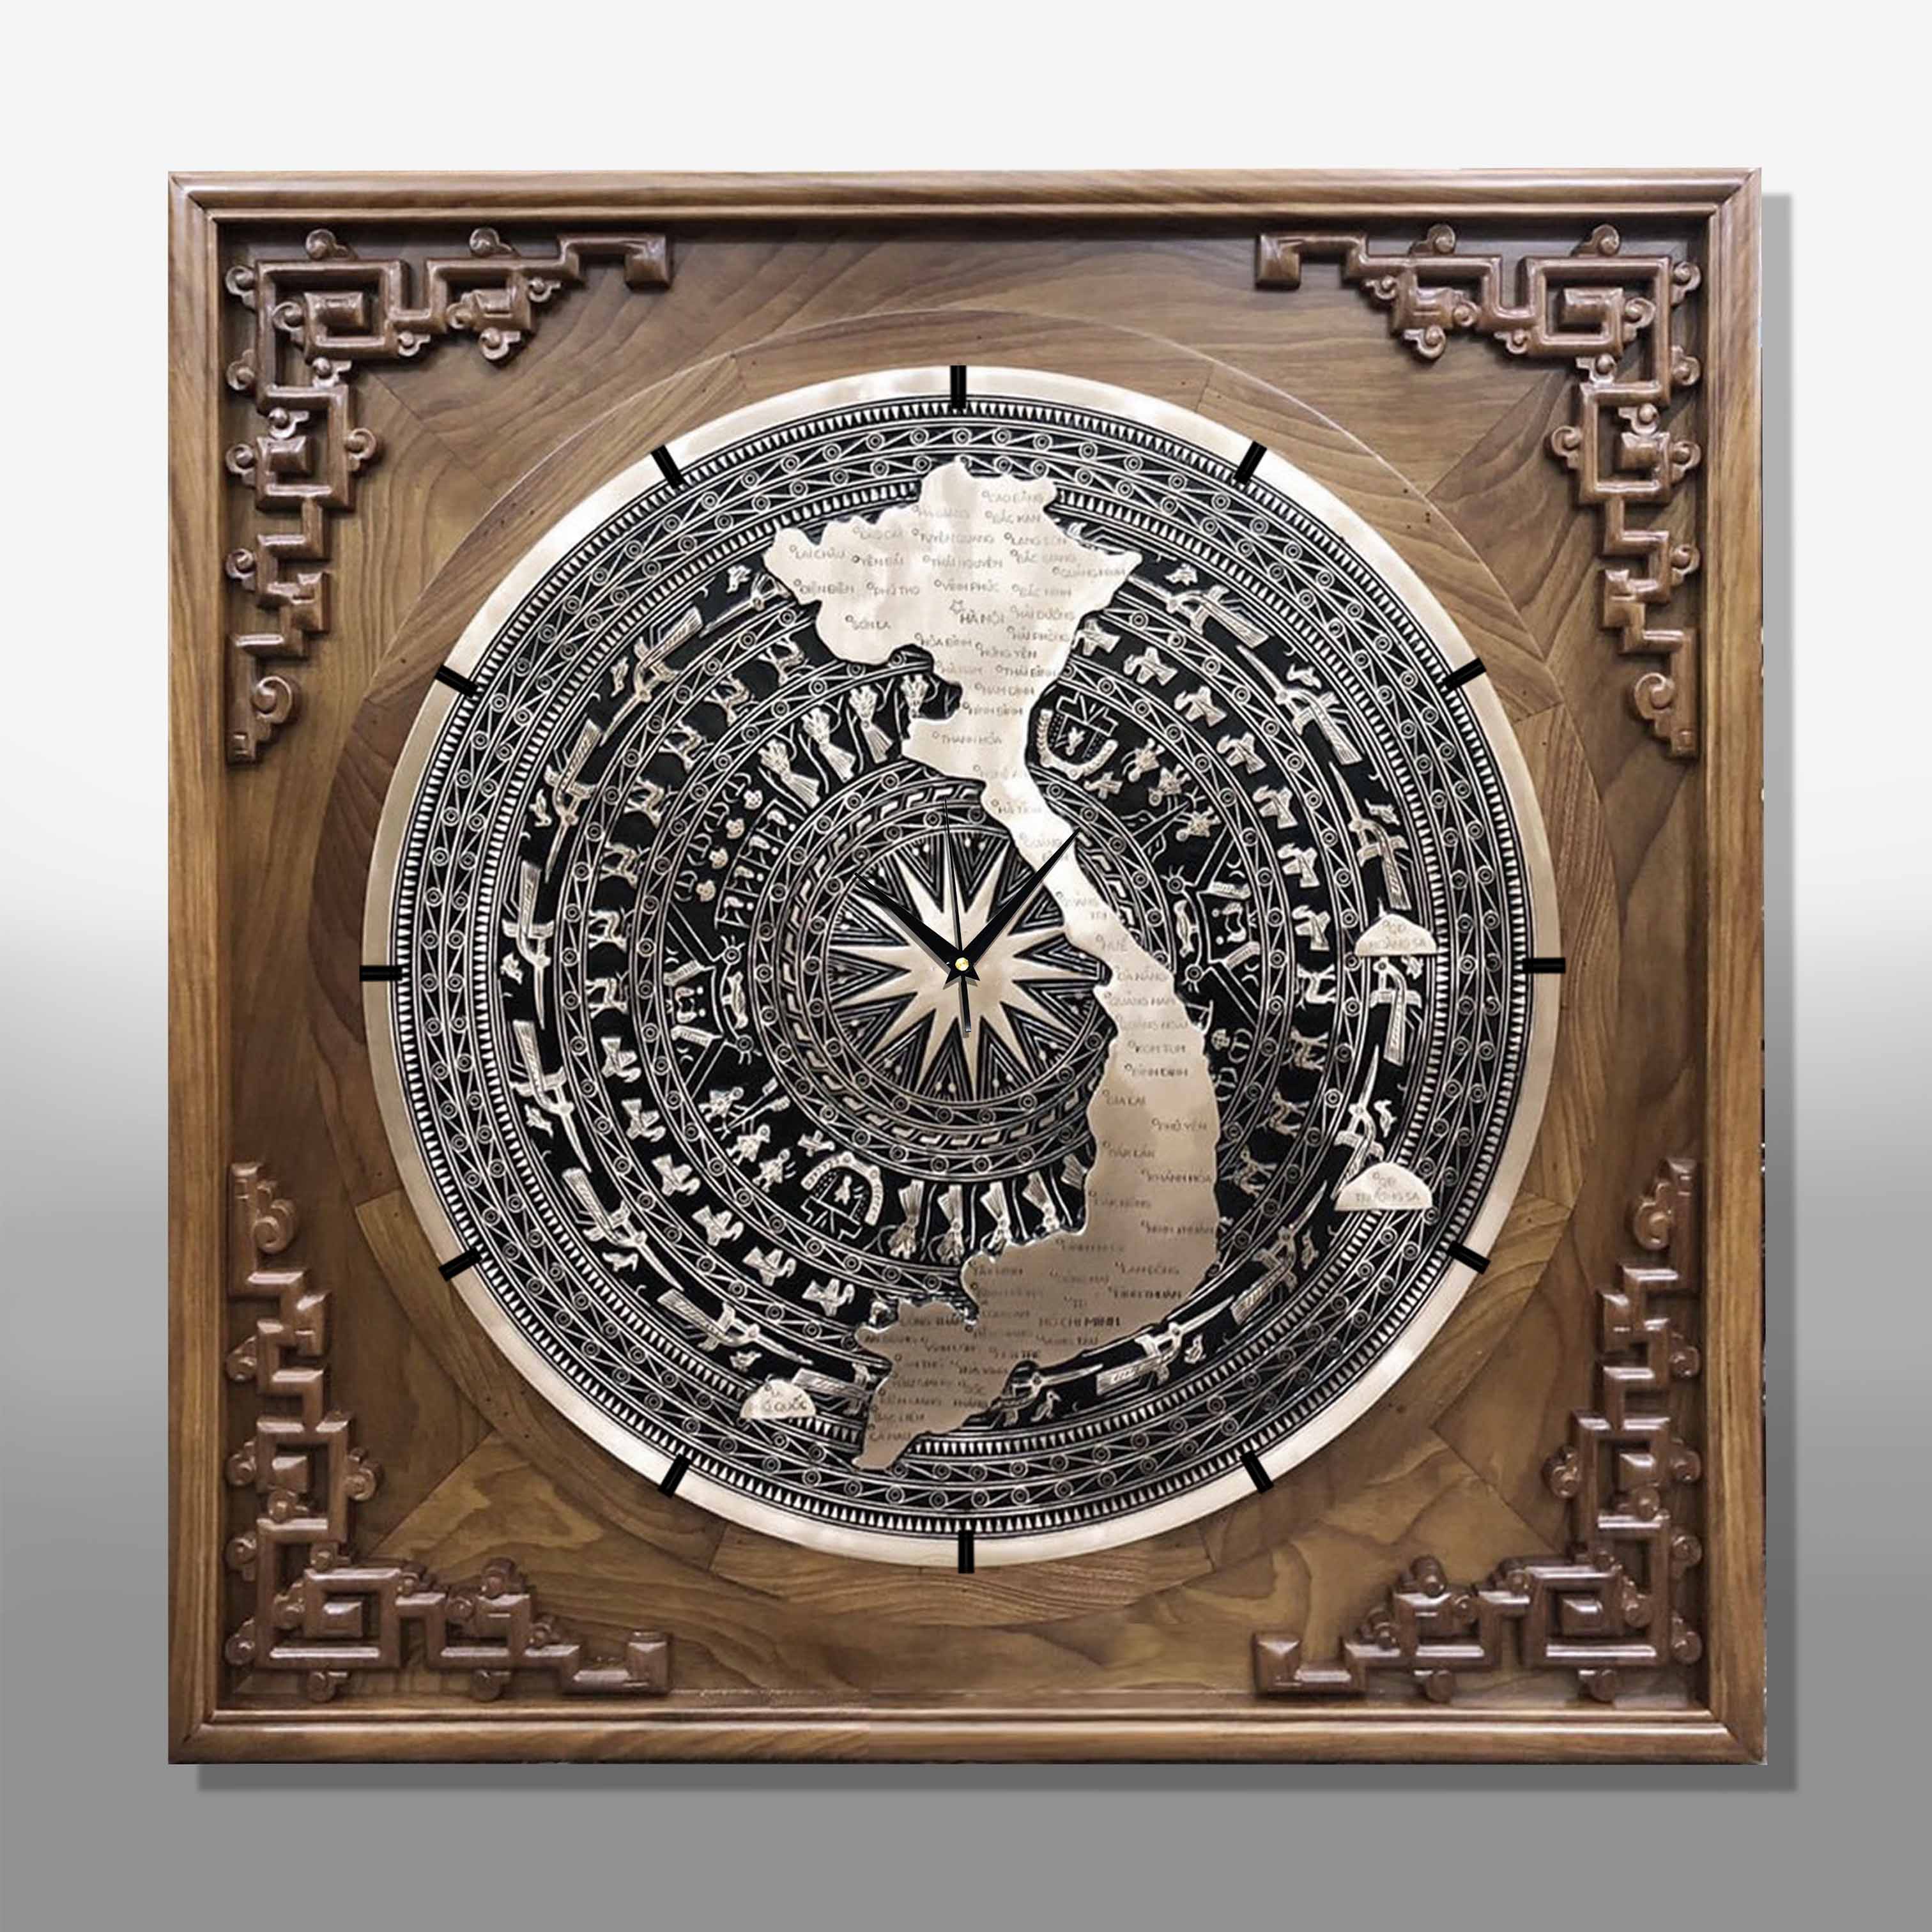 Wall clock with bronze drum face and Vietnam map - DTT42LHFU